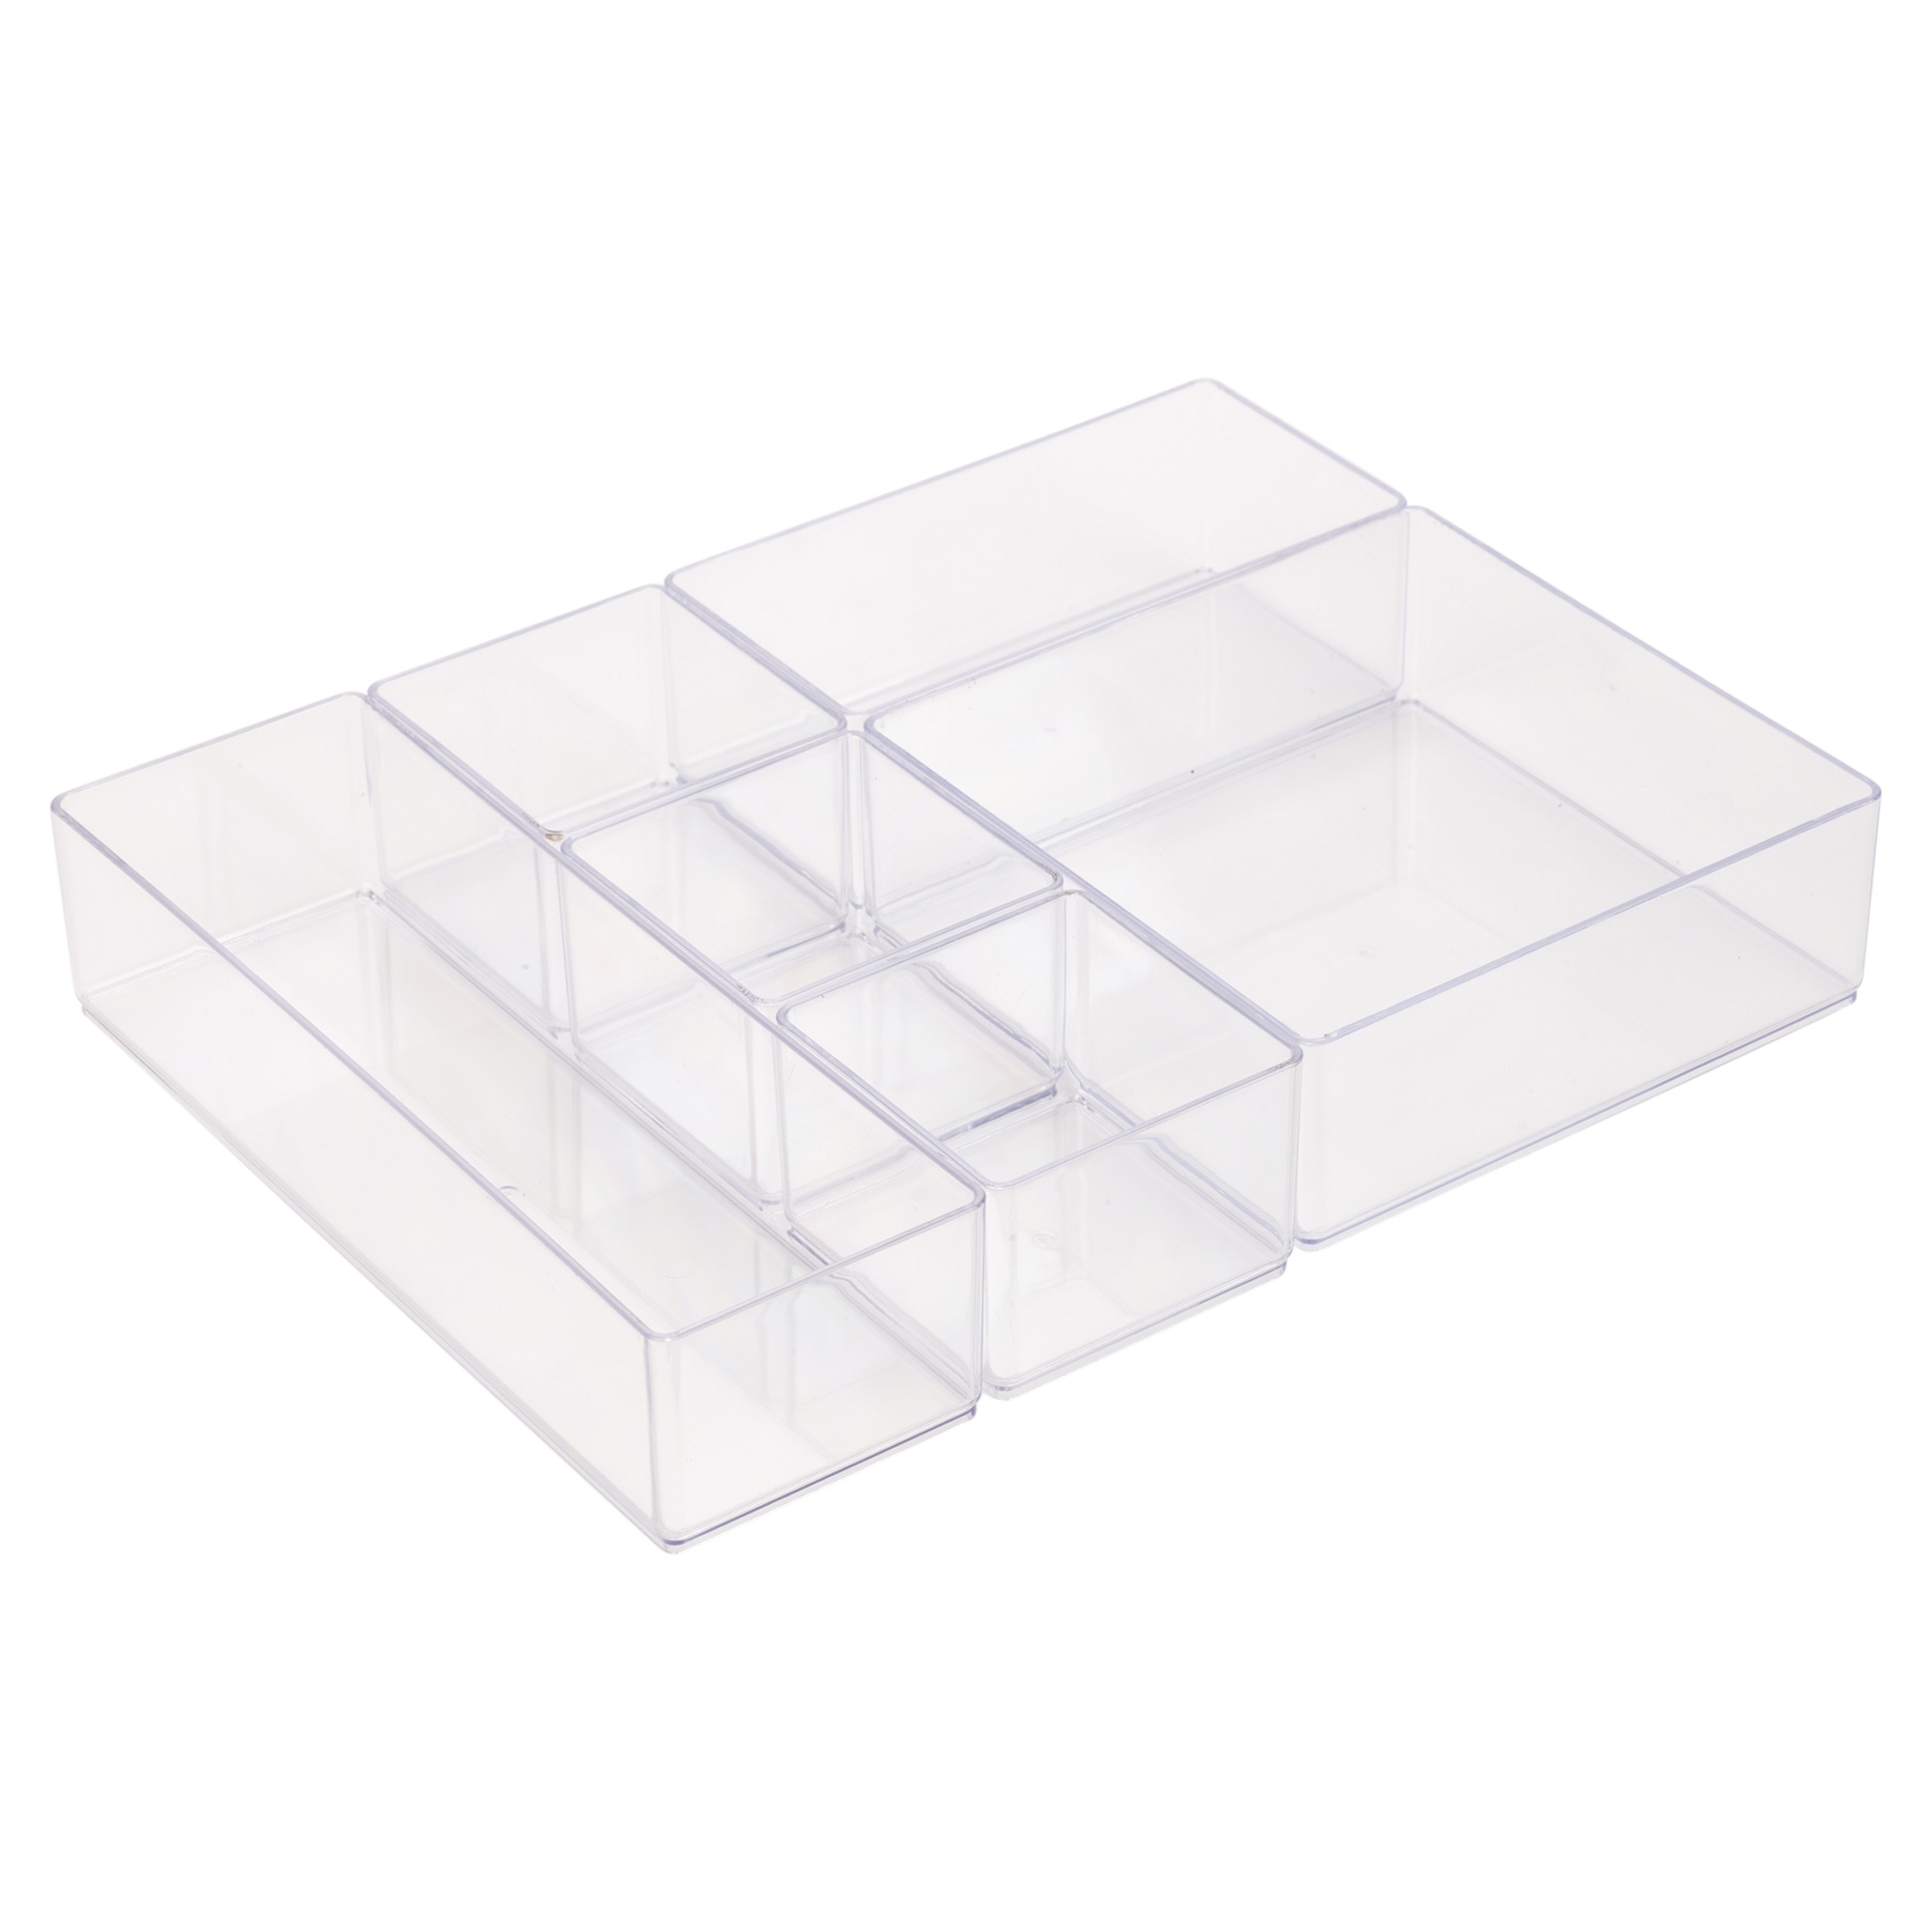 6pc Acrylic Drawer Organiser Compartments Clear Make Up Brushes Draw ...